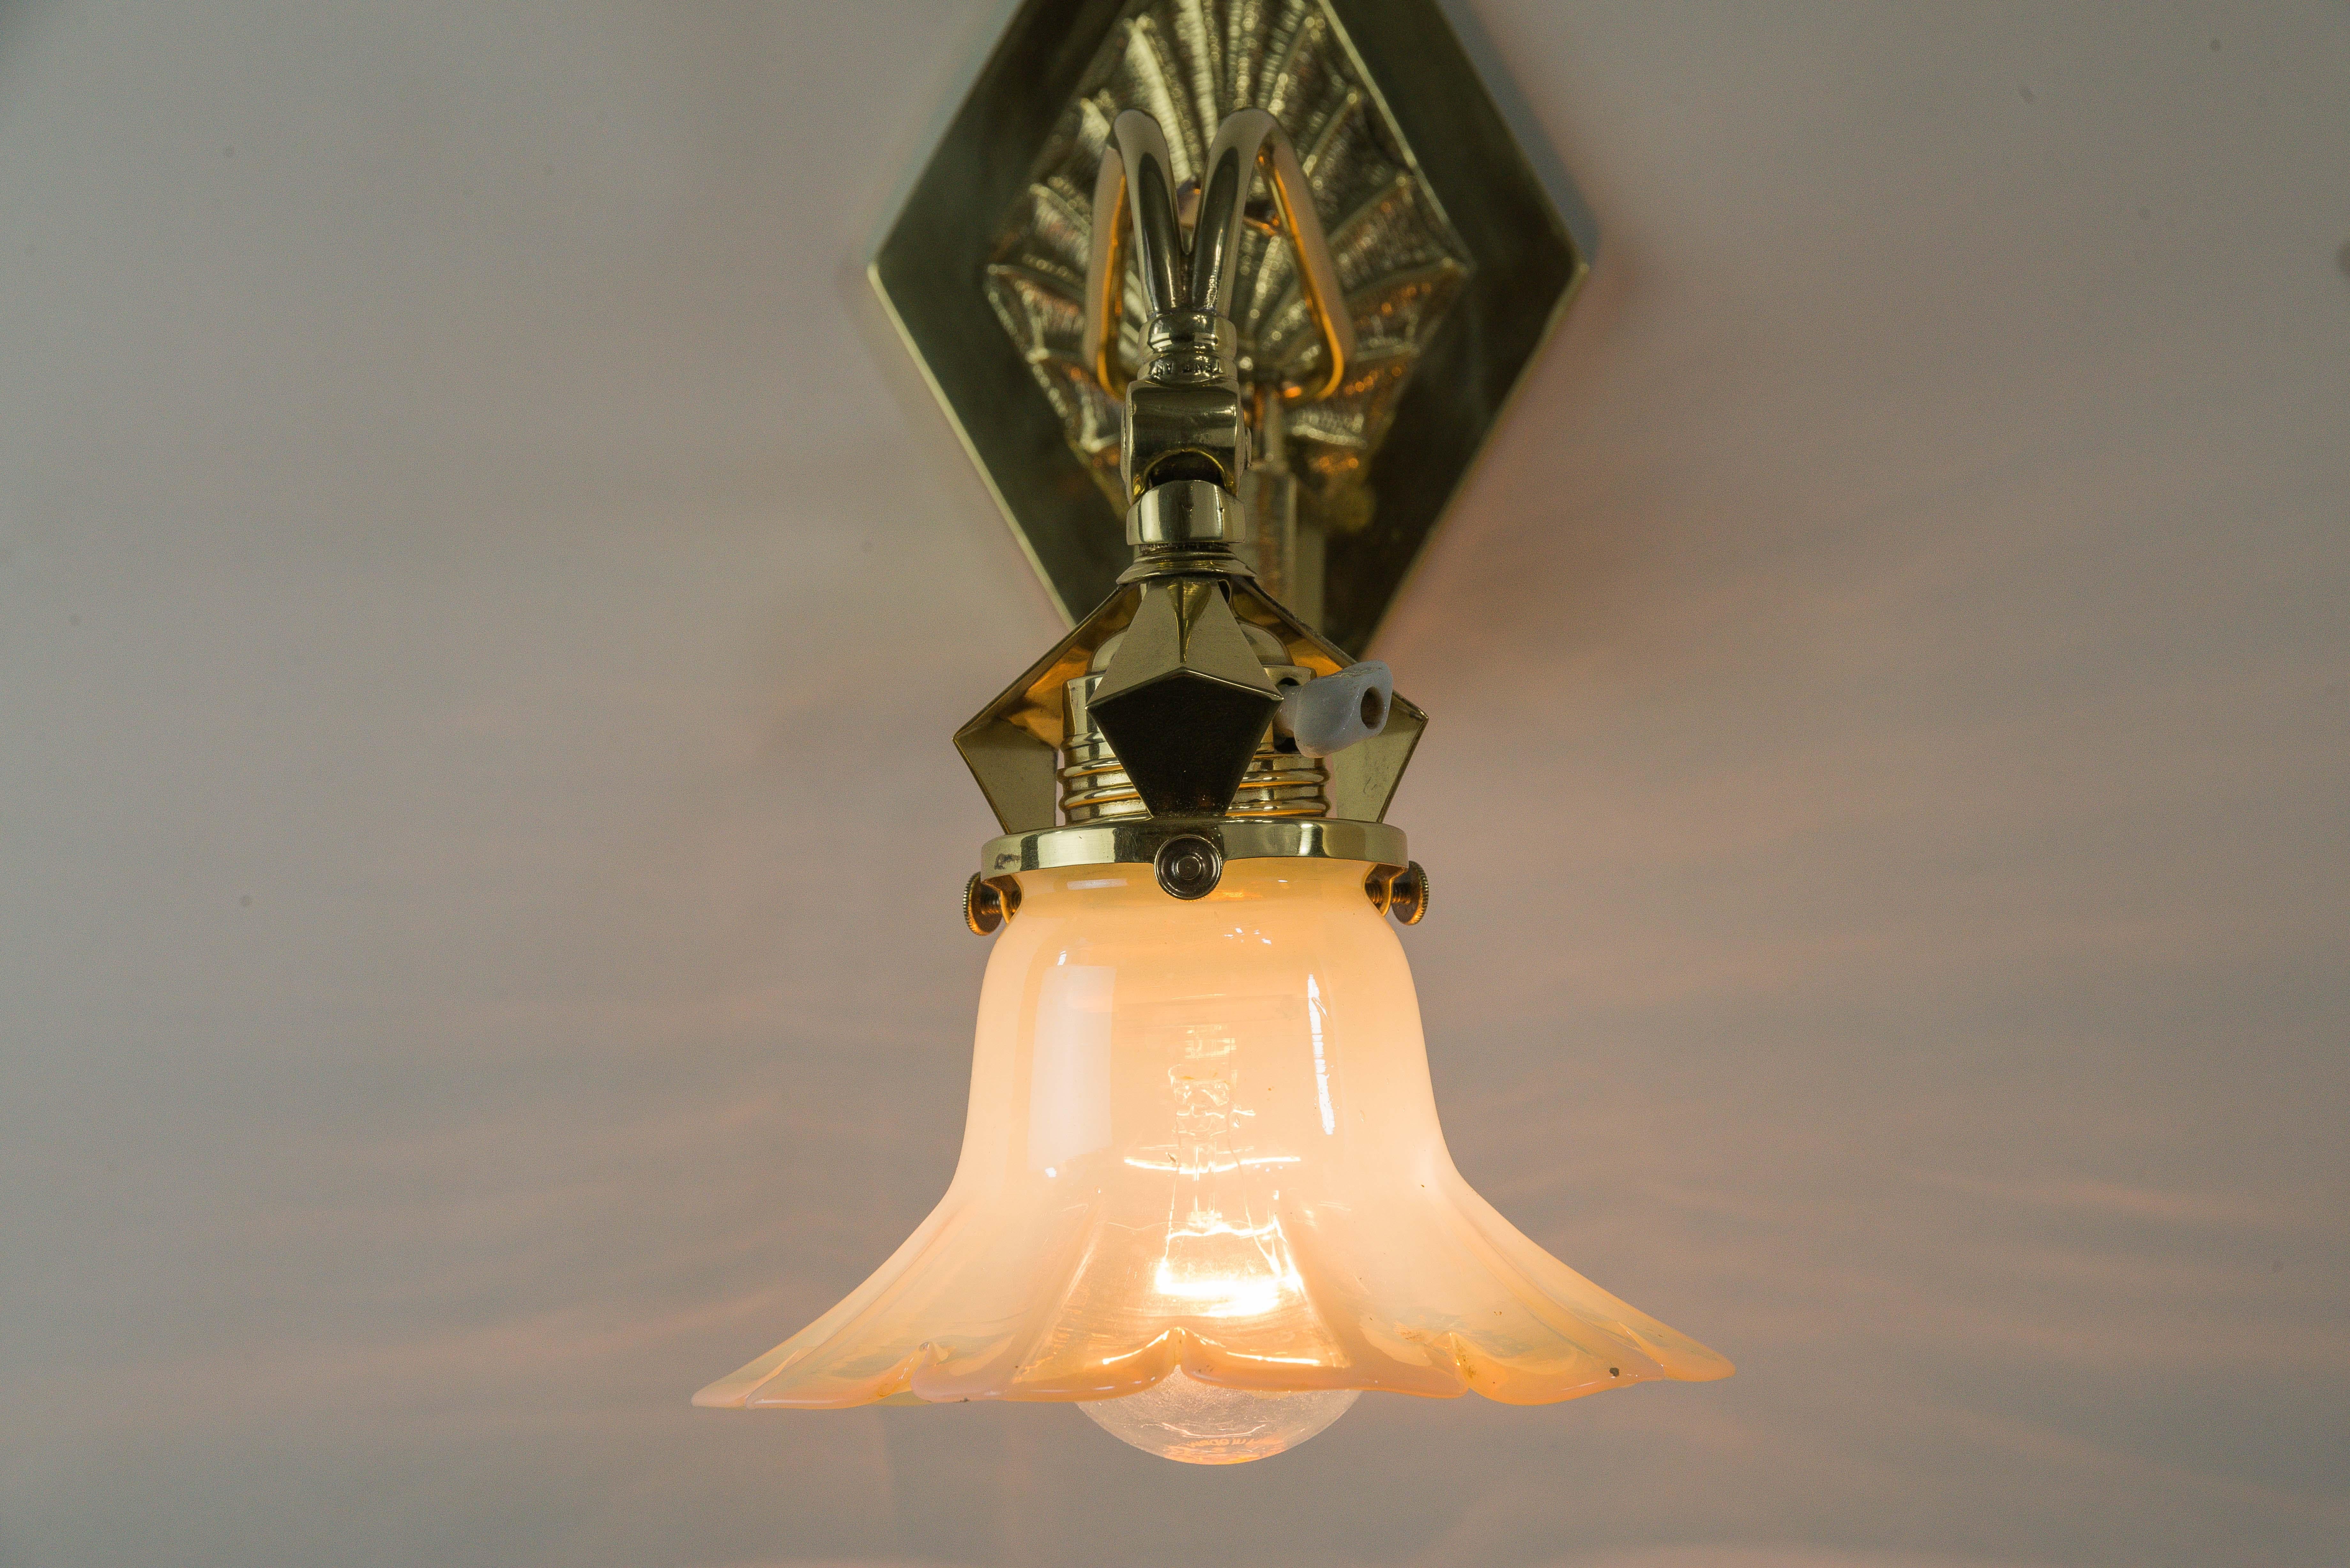 Adjustable Art Deco Wall Lamp circa 1920s with Opaline Glass Shade 7